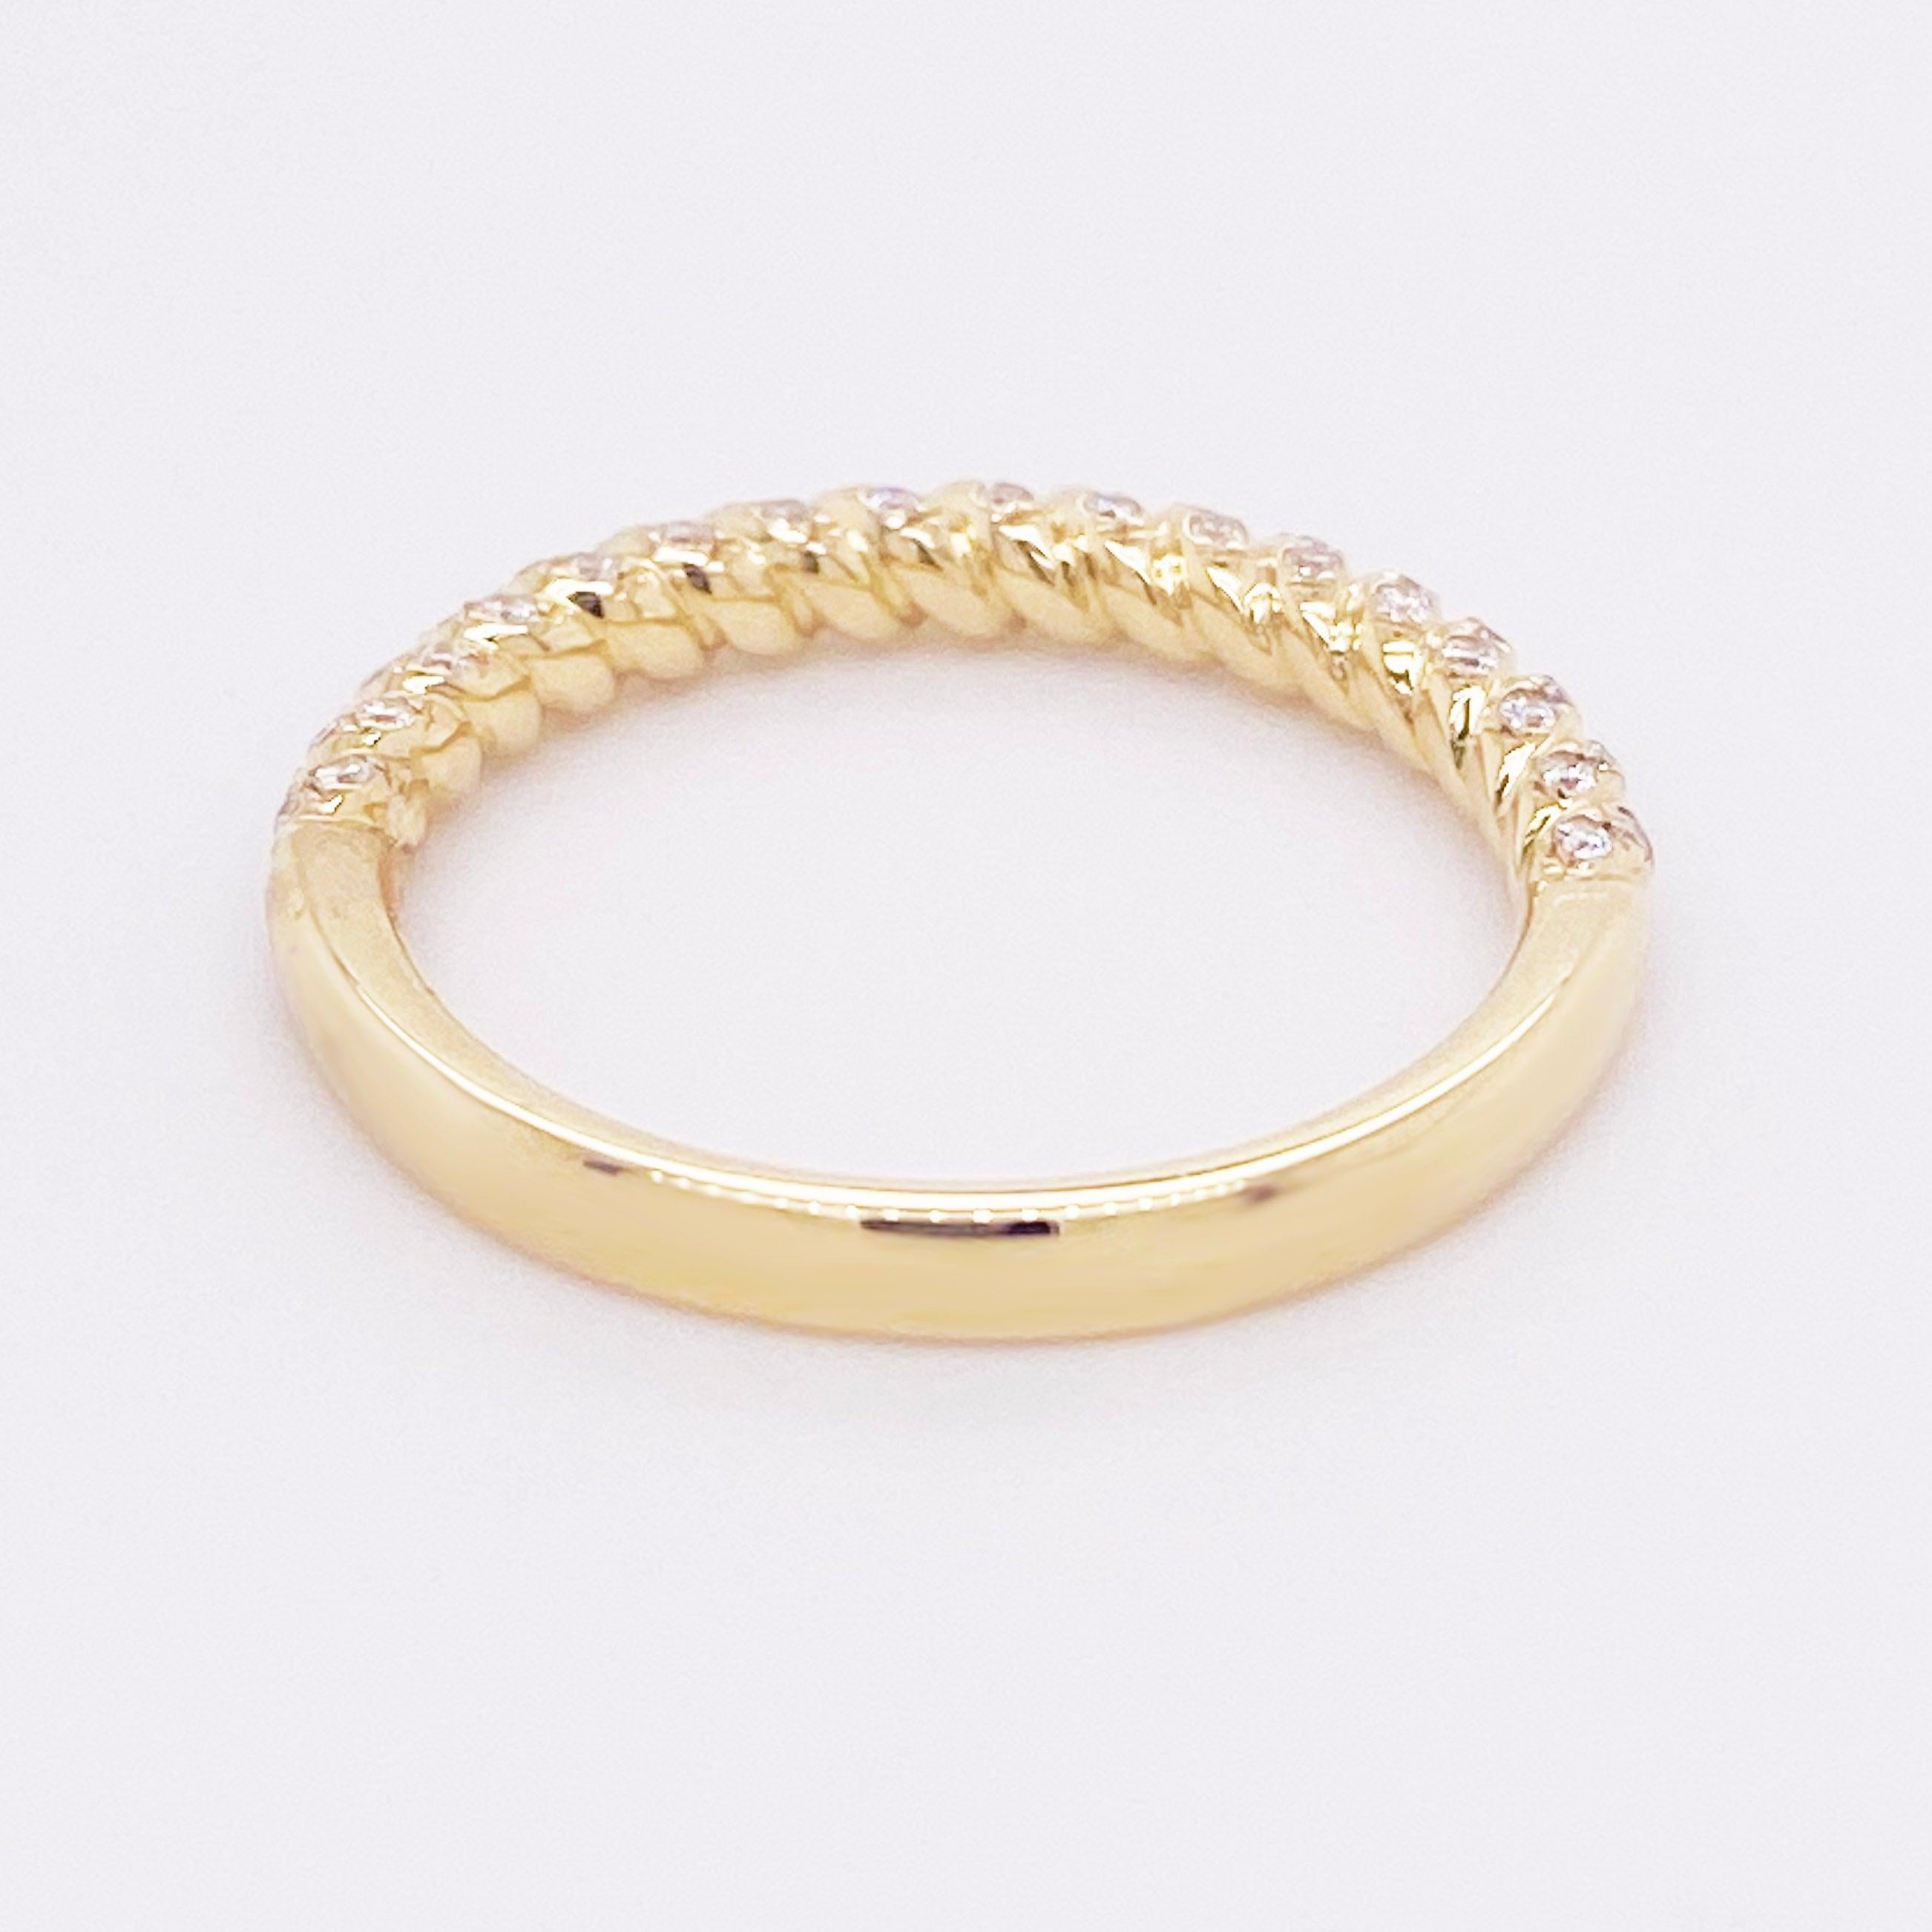 For Sale:  Twisted Diamond Band, 14 Karat Gold, Wedding Band, Twisted Ring, Stackable 6